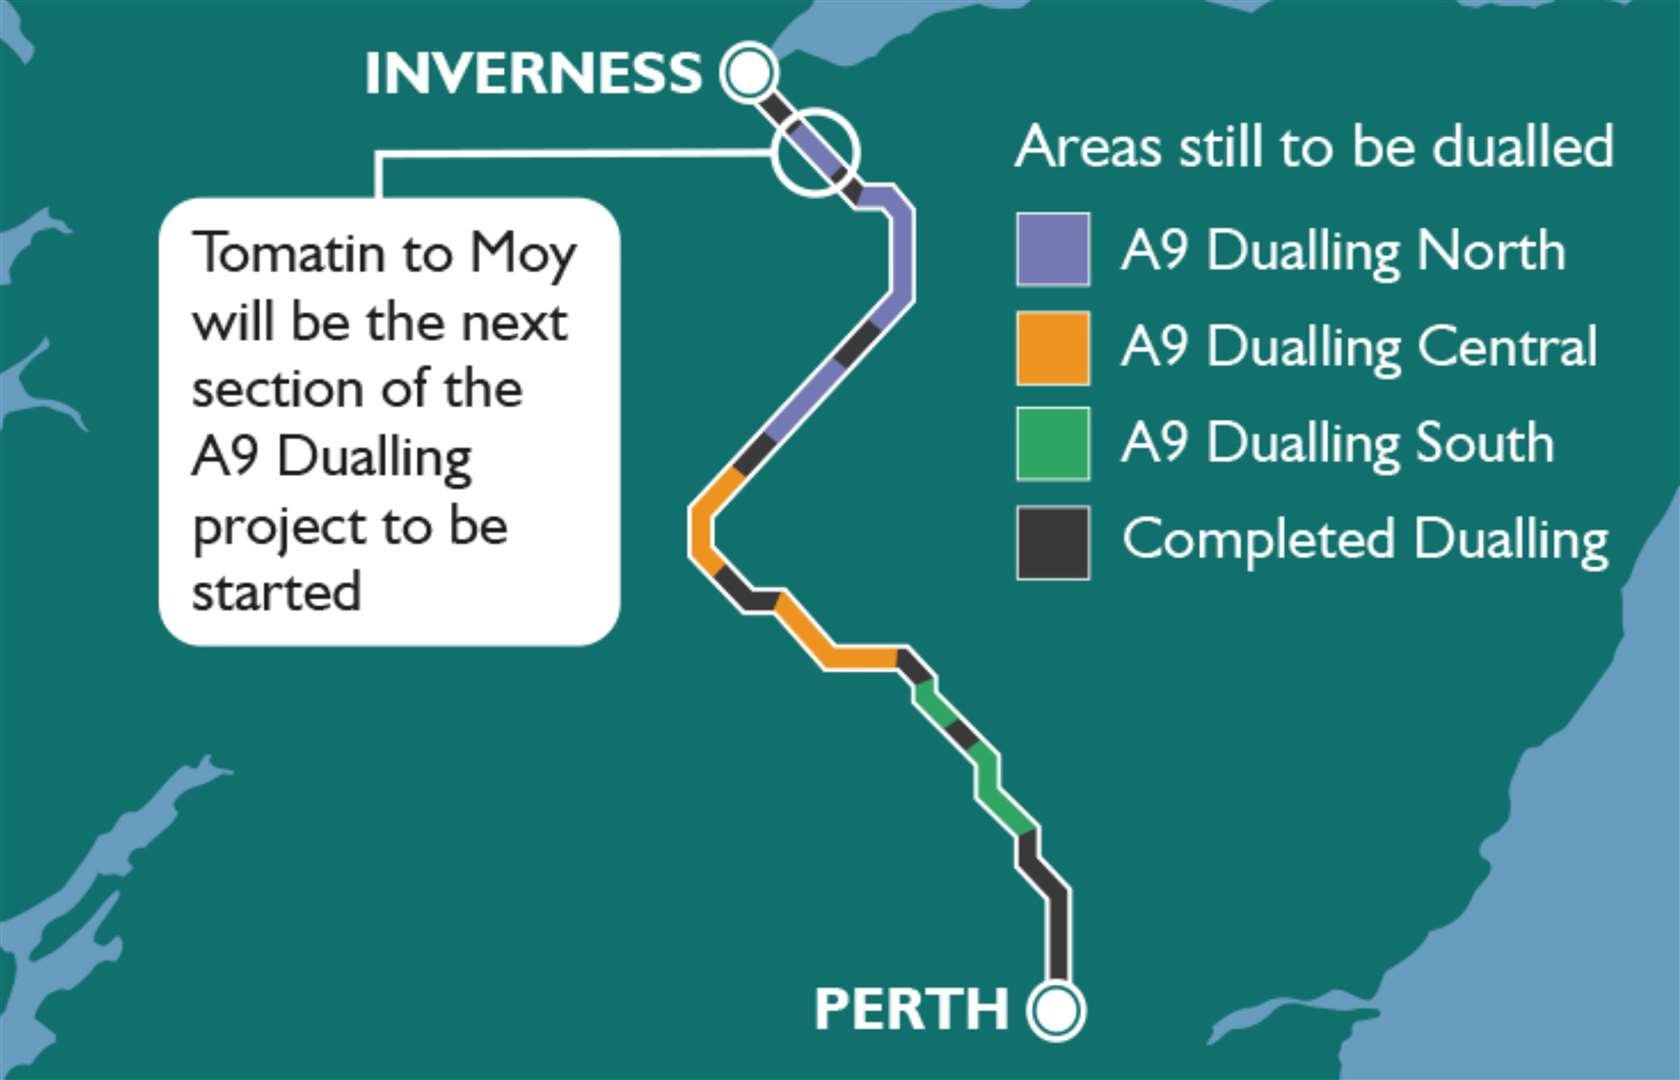 The state of play regarding dualling of A9 between Inverness and Perth.